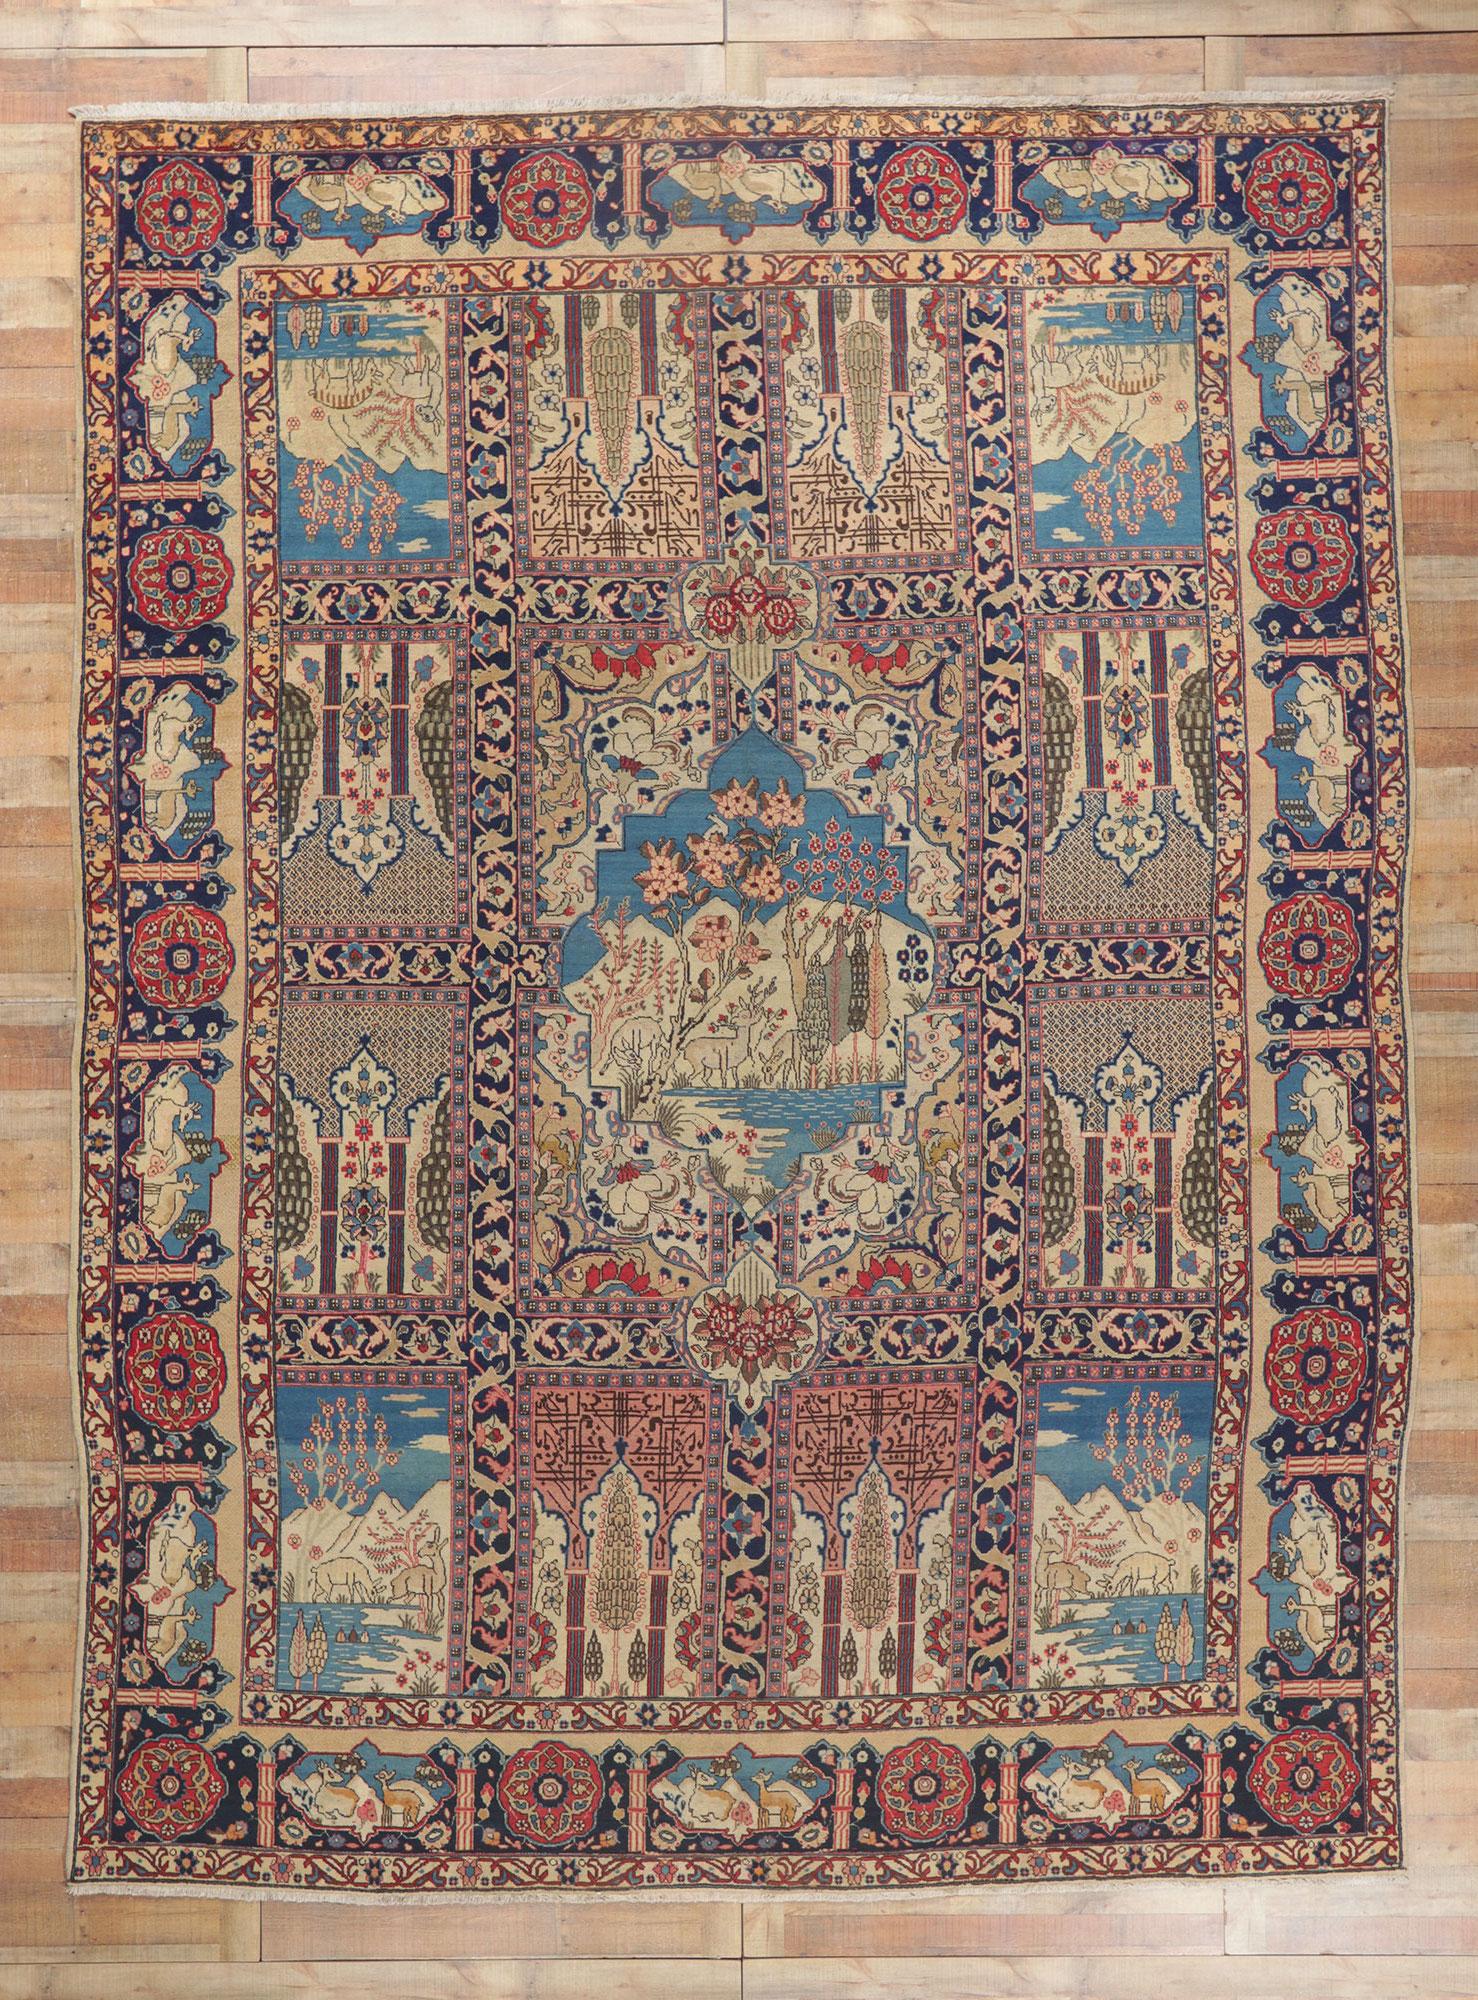 20th Century Antique Persian Tabriz Pictorial Rug with Garden Design For Sale